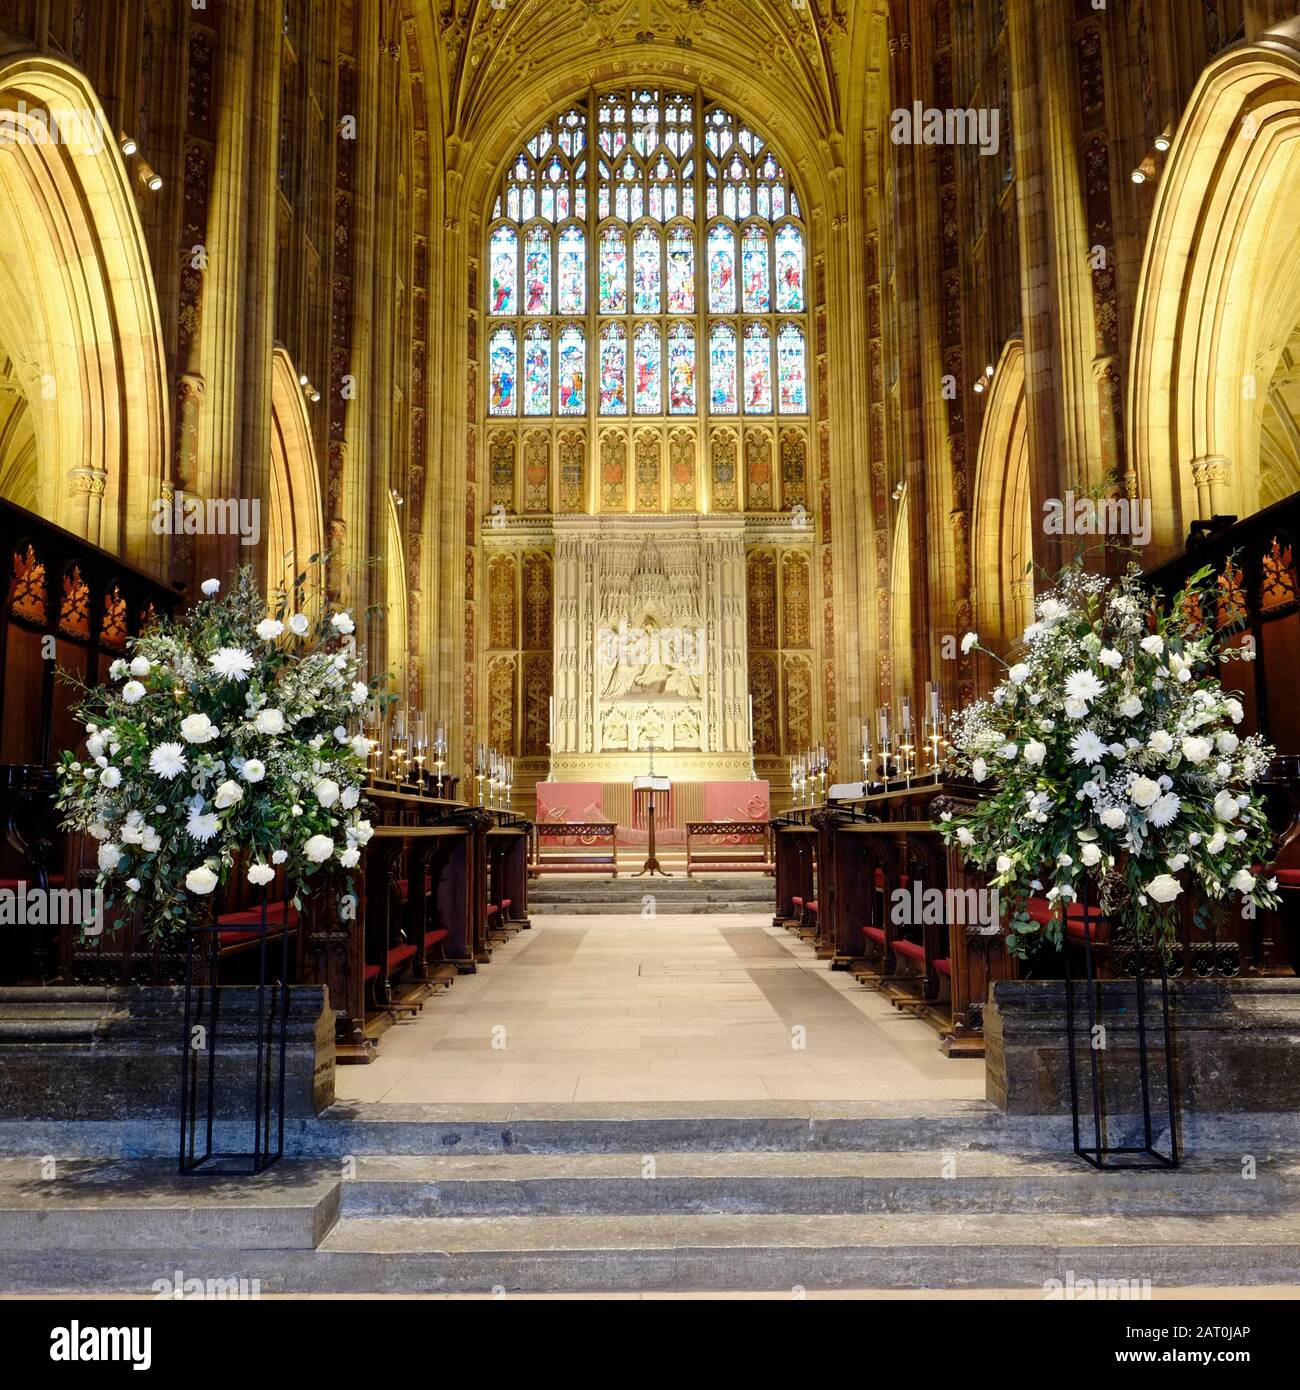 Interior of Sherborne Abbey from the nave Stock Photo